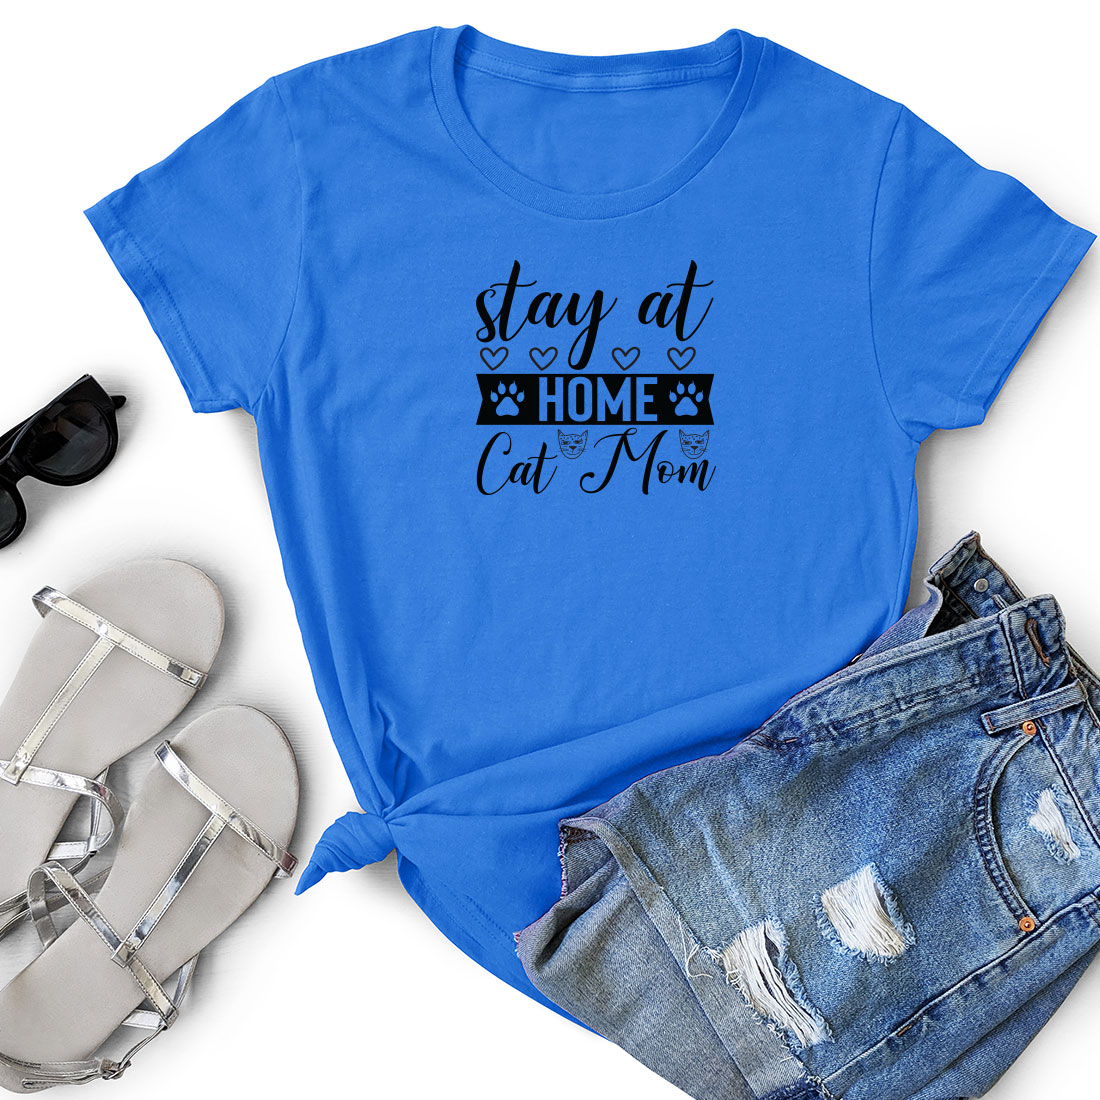 Blue shirt that says stay at home cat mom.